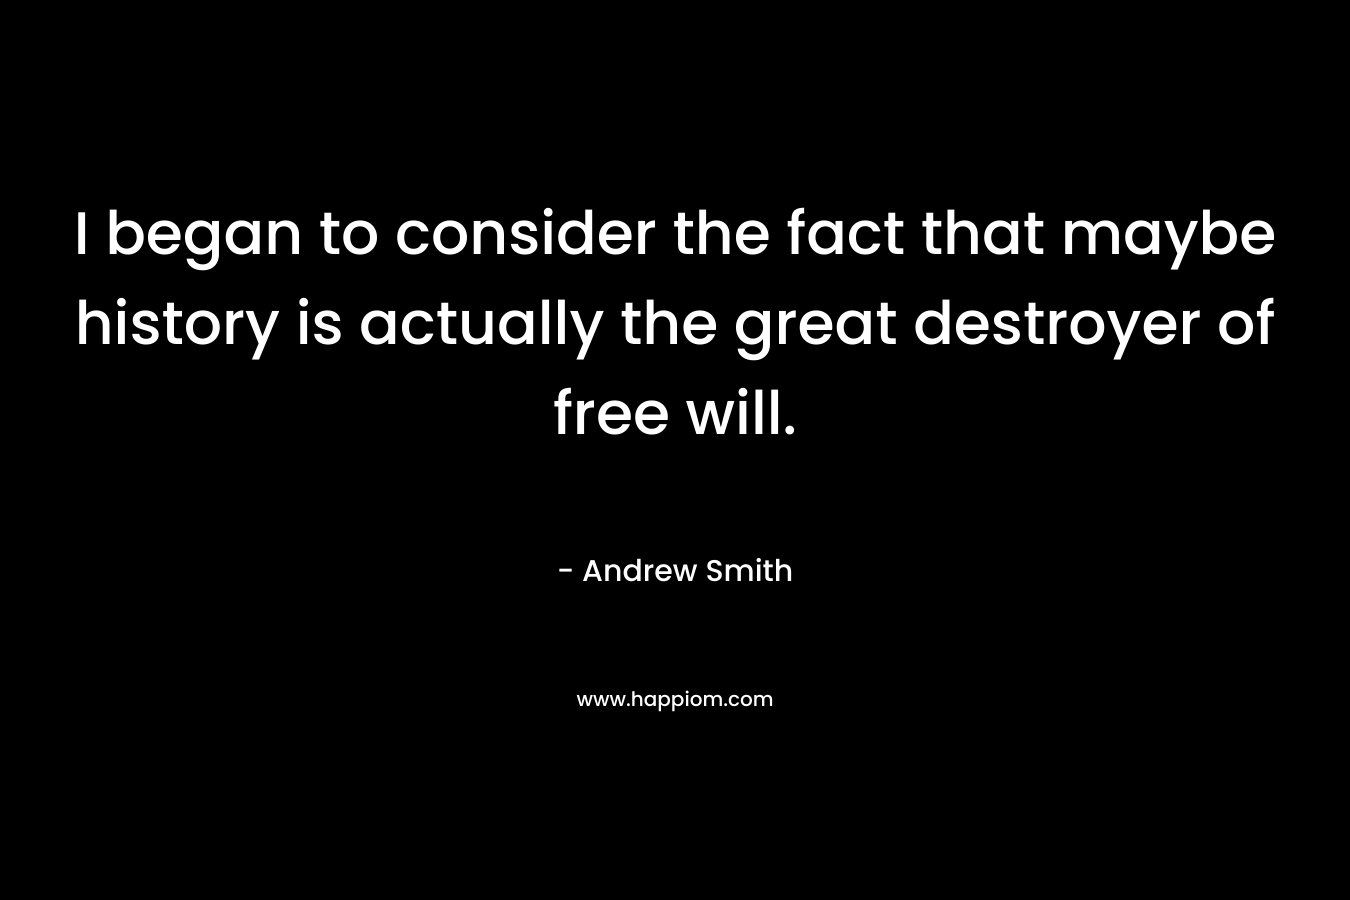 I began to consider the fact that maybe history is actually the great destroyer of free will.